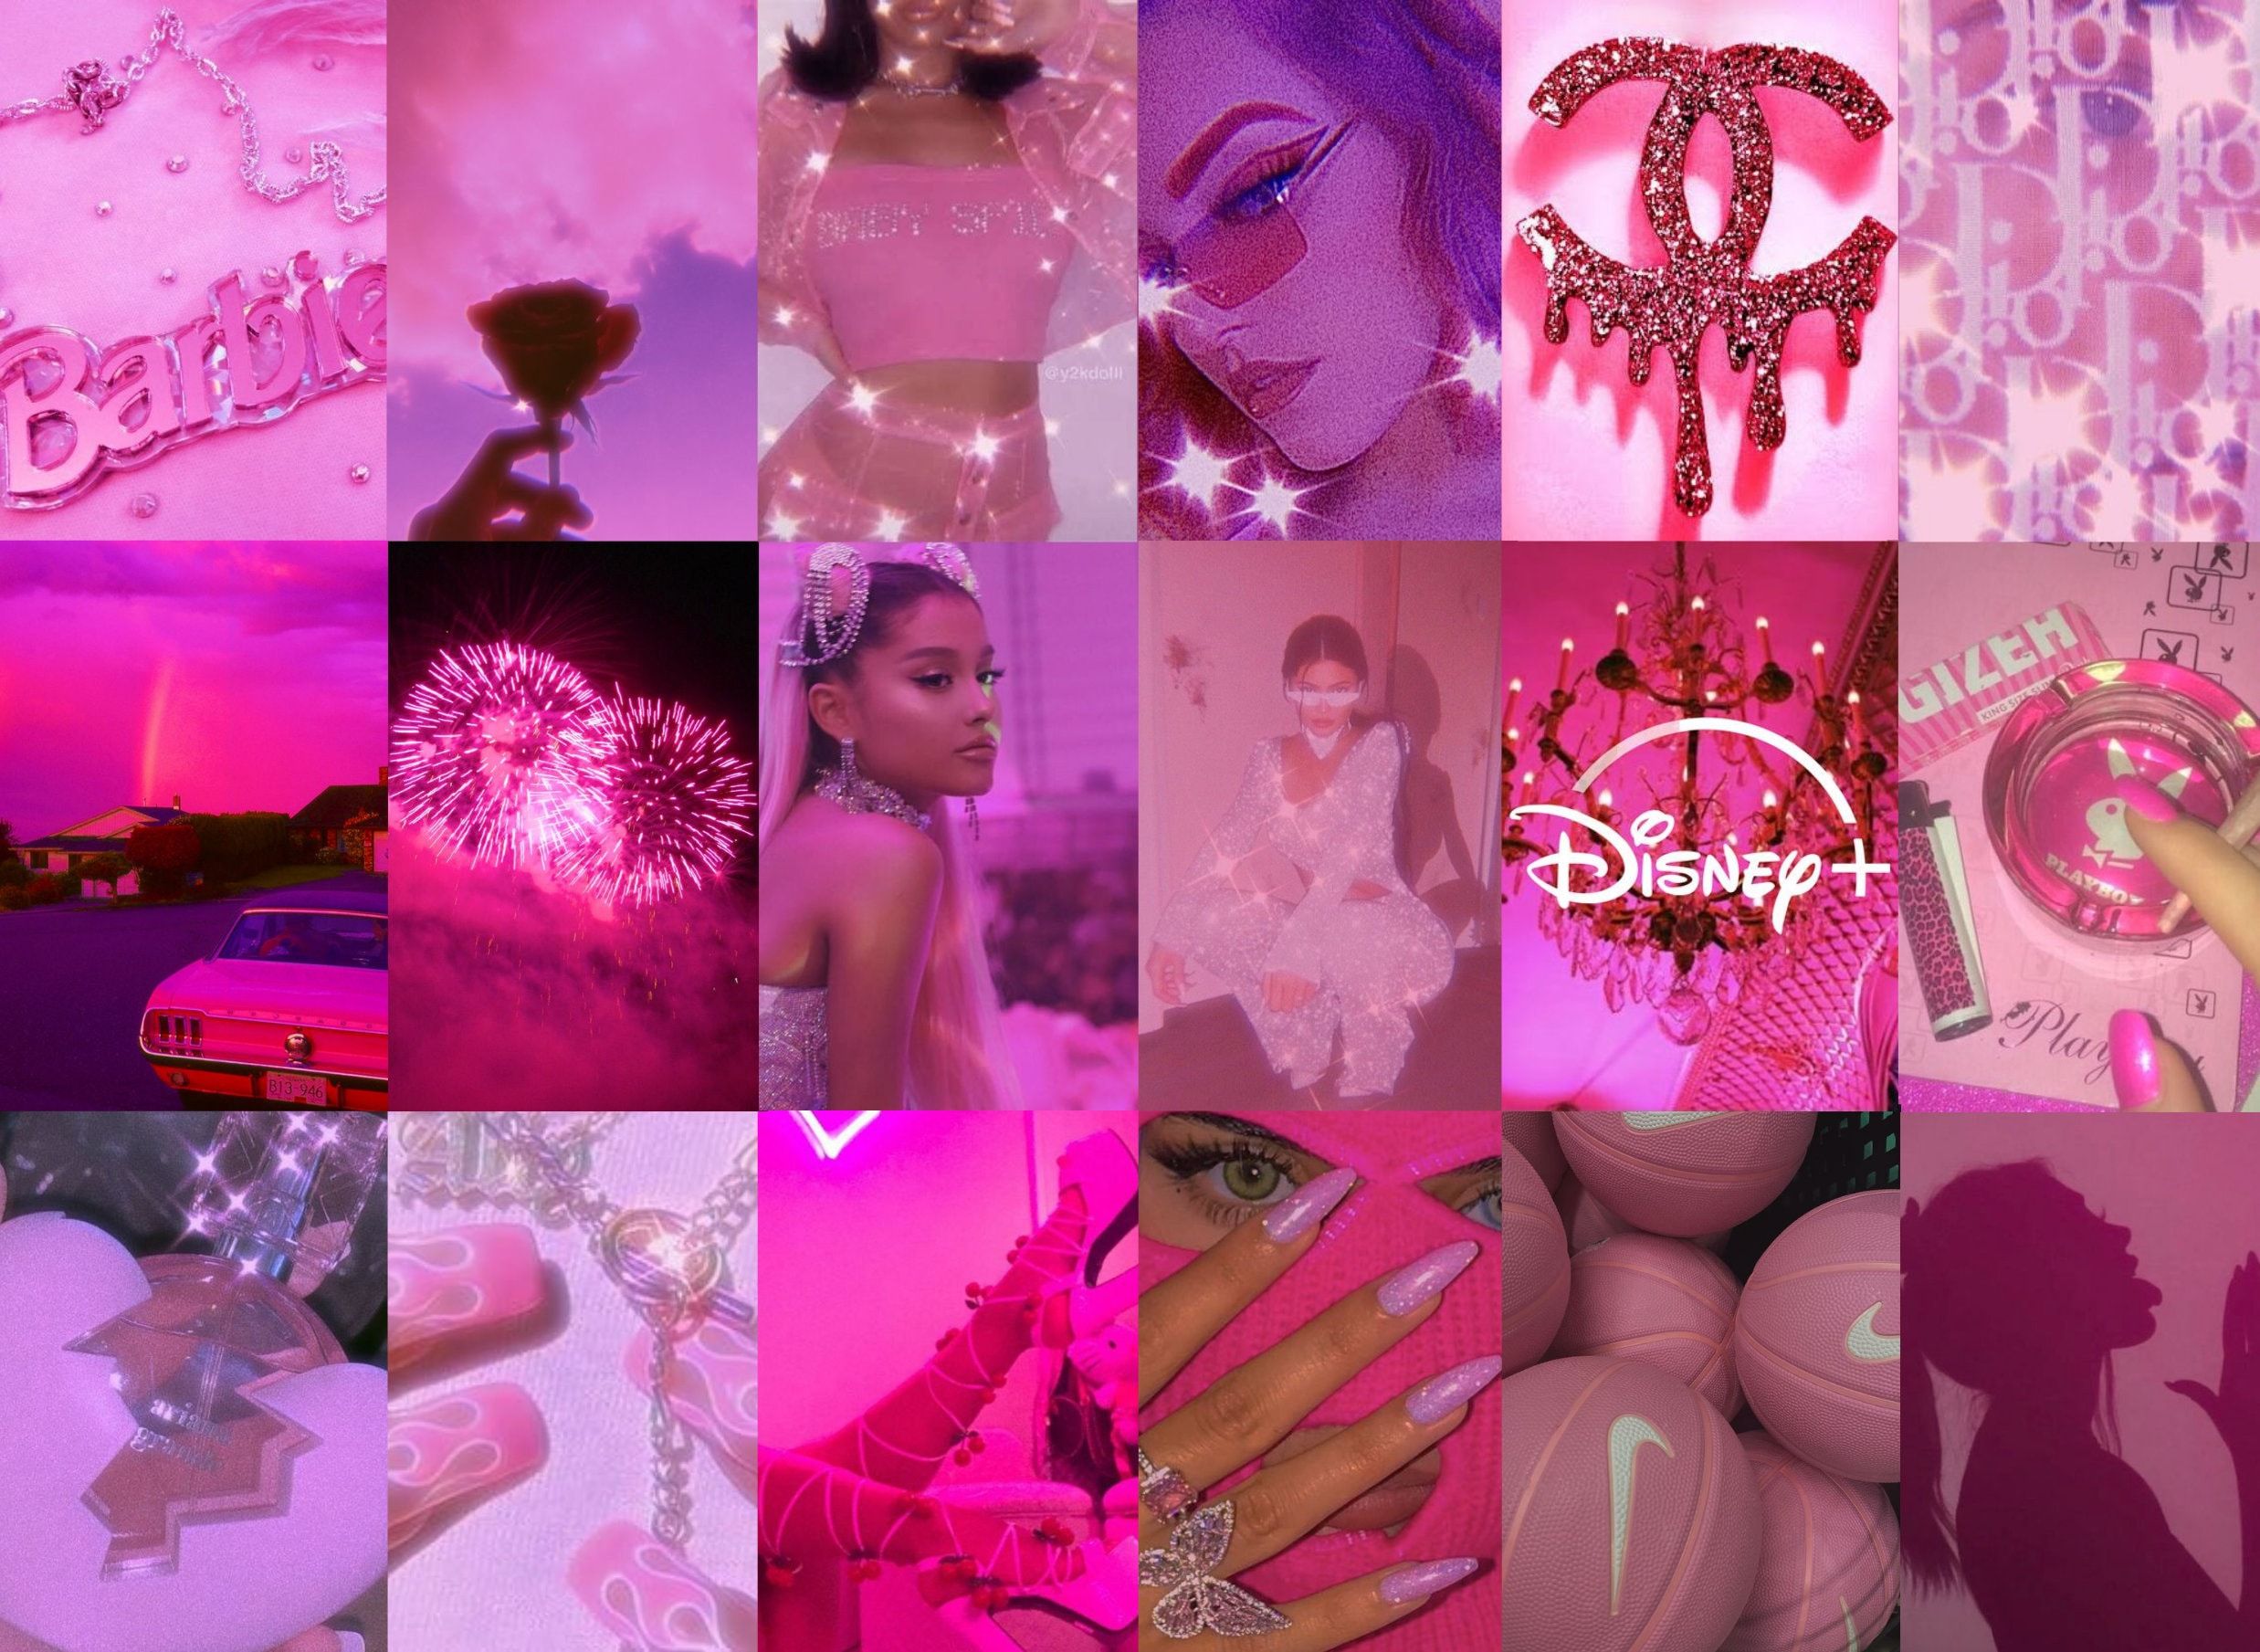 Aesthetic pink wallpaper collage of photos of ariana grande, disney, and nike. - Nails